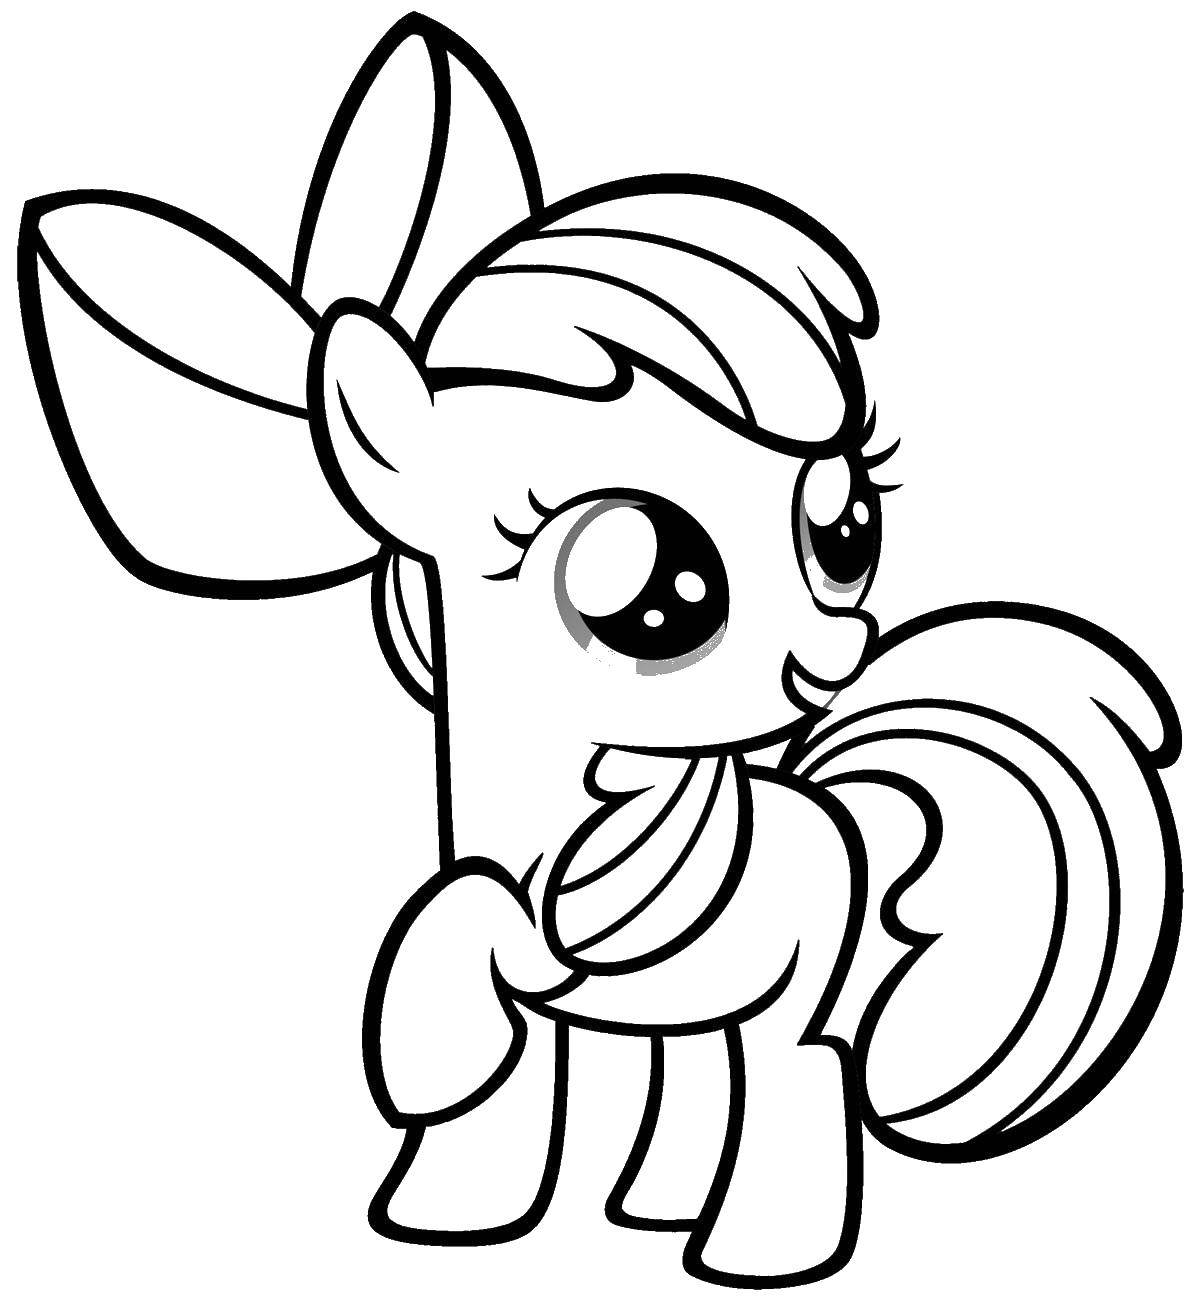 Coloring Pony with bow. Category my little pony. Tags:  my little pony, horse, bow.